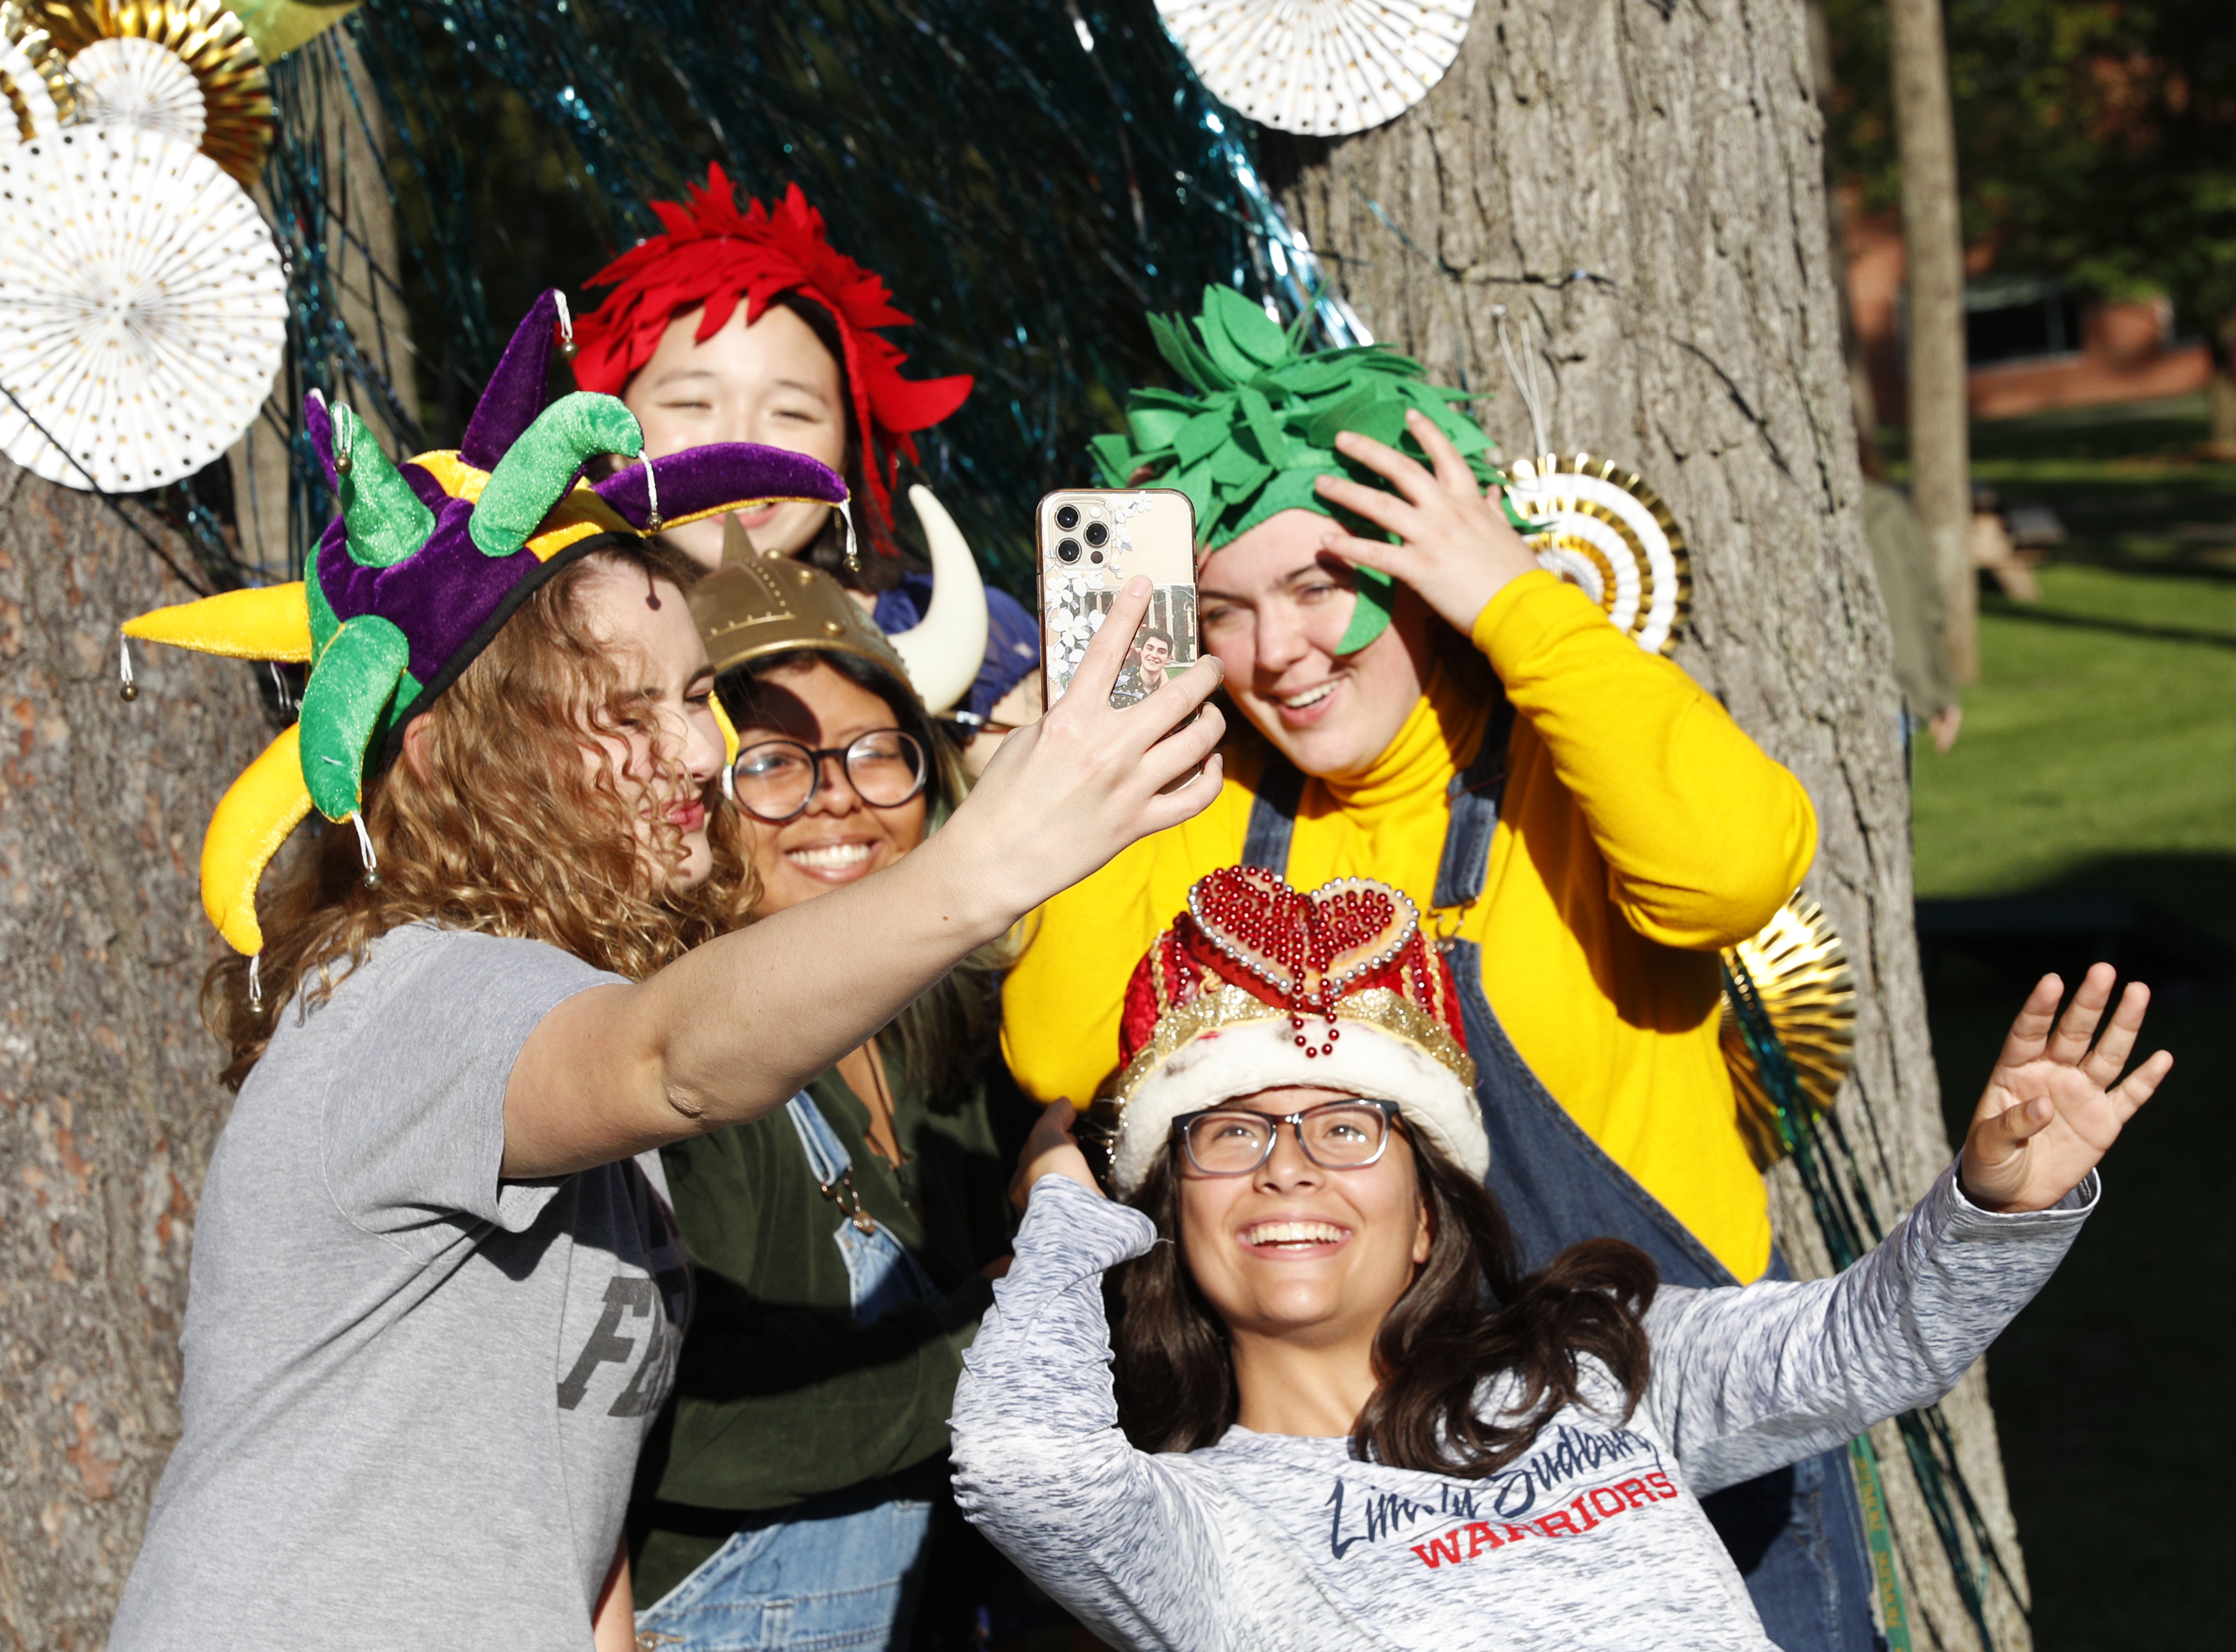 student take a selfie while wearing costume hats